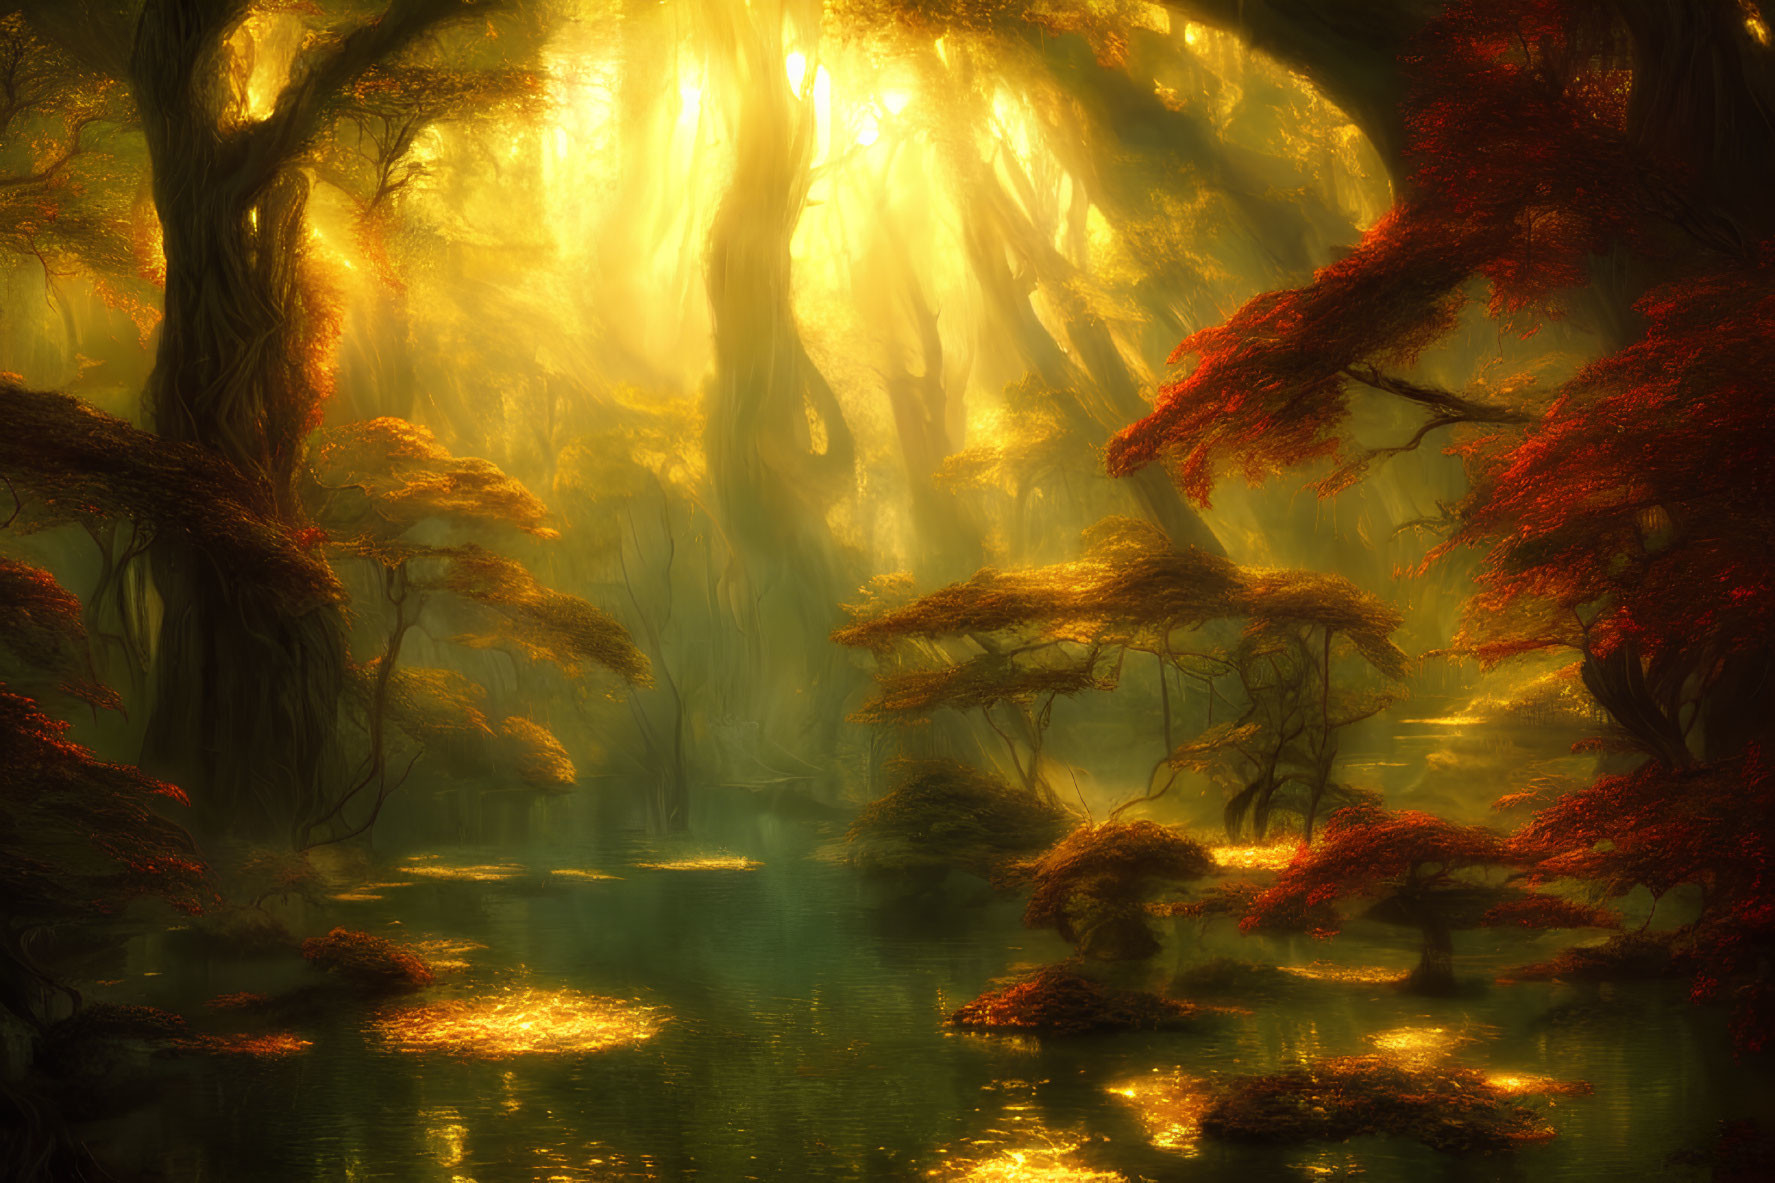 Tranquil forest scene with mist, red trees, and green pond